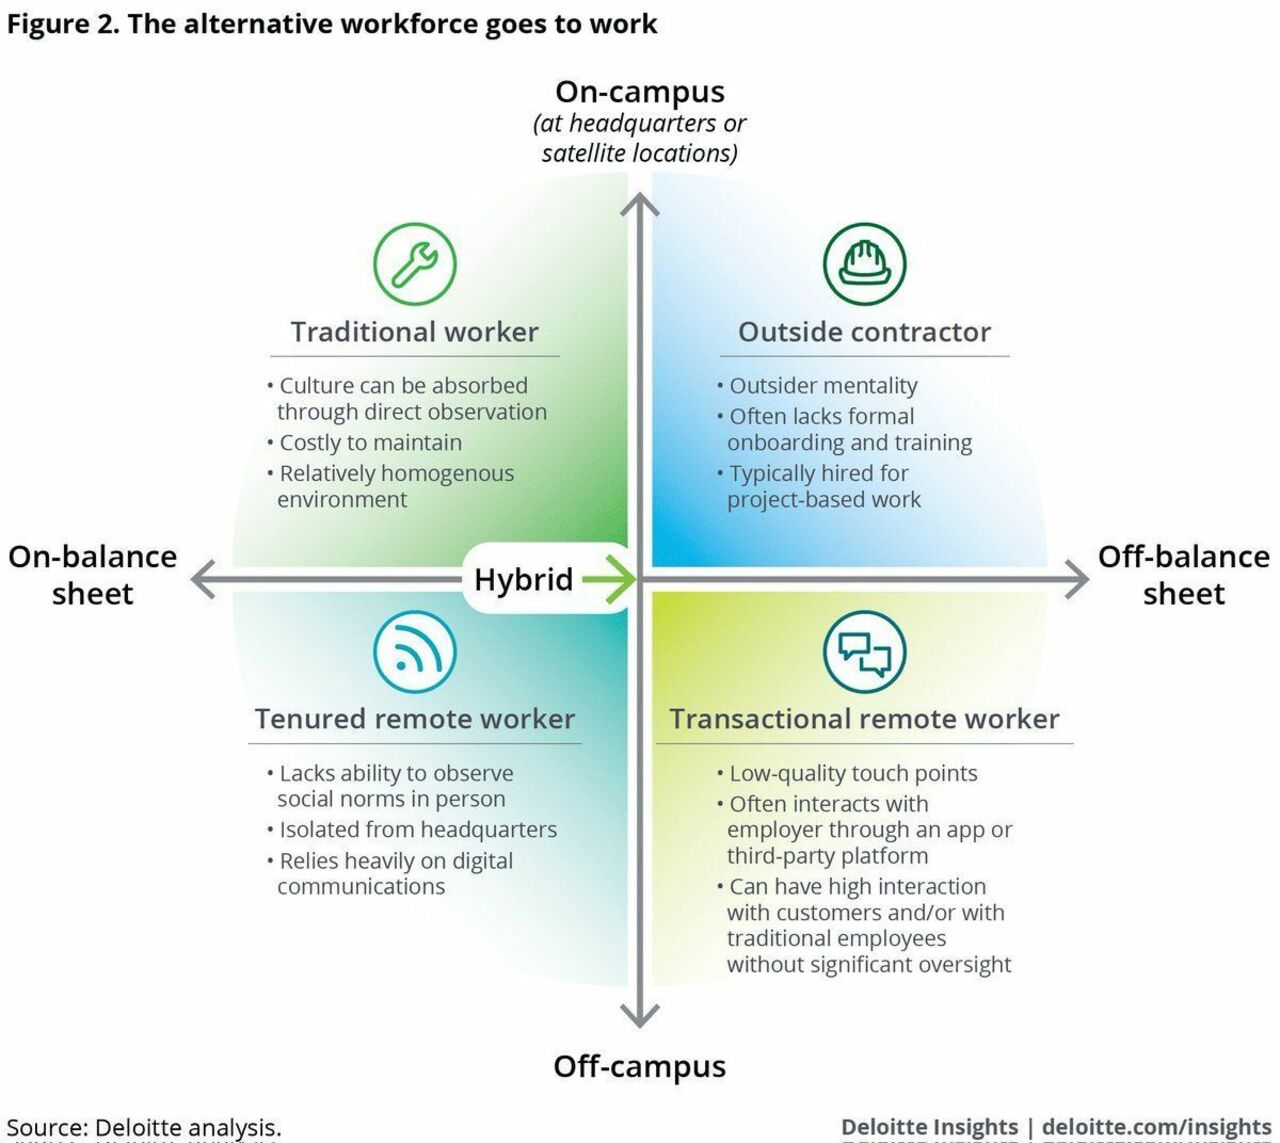 Technology enables the proximity of work to expand beyond a company’s walls and balance sheets. Link >> https://buff.ly/30he0IP @DeloitteInsight via @antgrasso #futureofwork #technology #innovation #DigitalTransformation https://t.co/jvwllWWHxQ